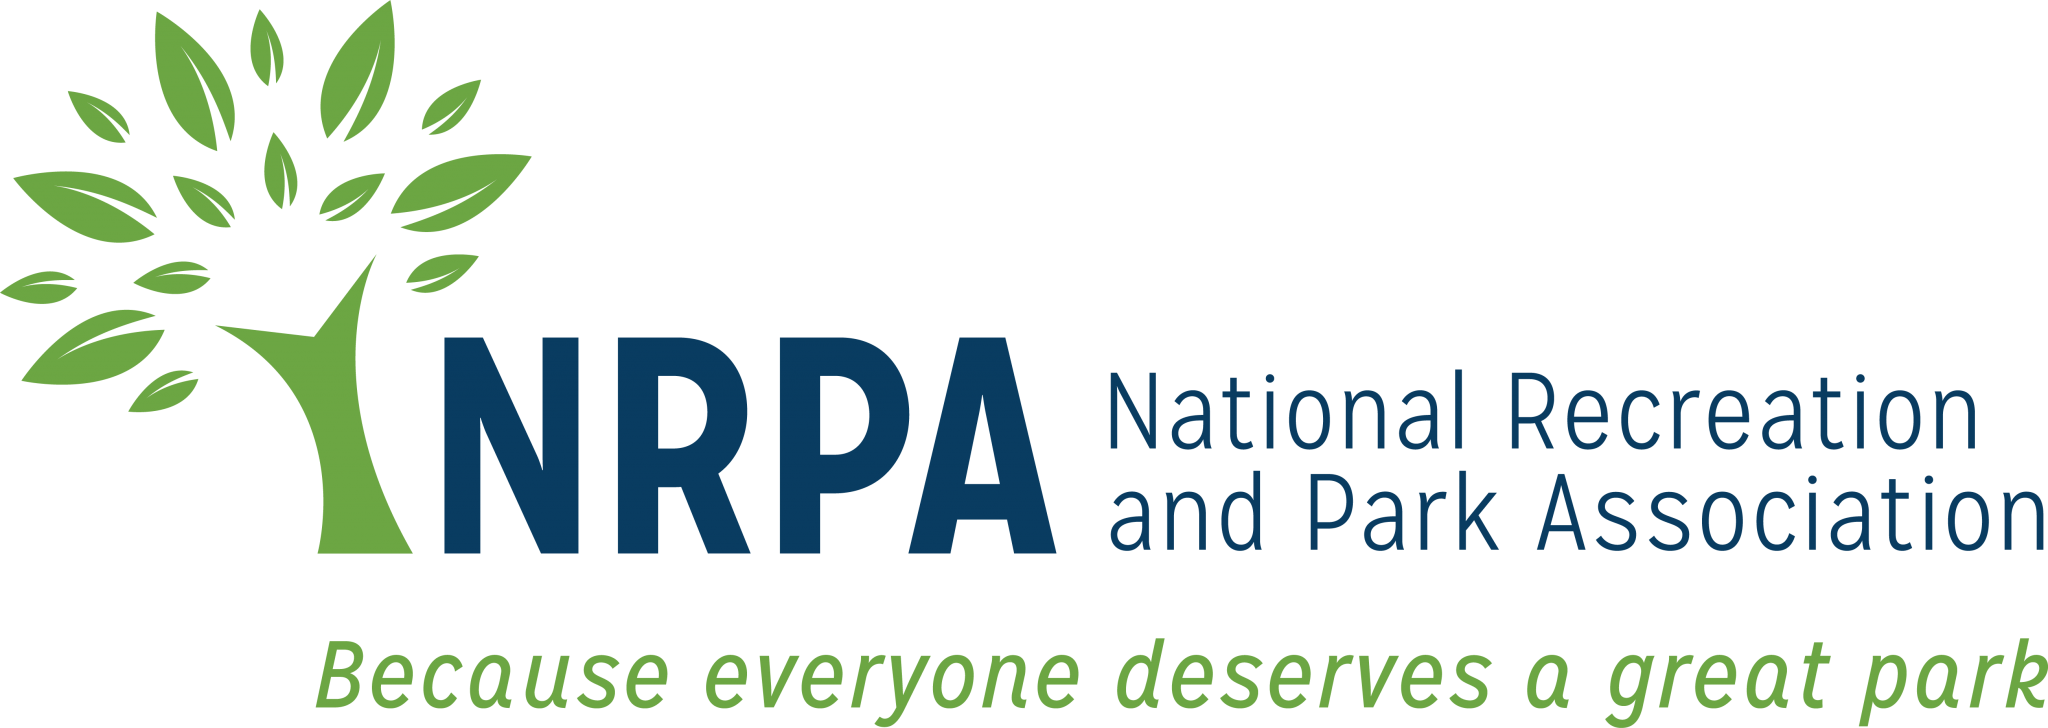 NRPA-Logo-with-Tagline-Large-2048x728